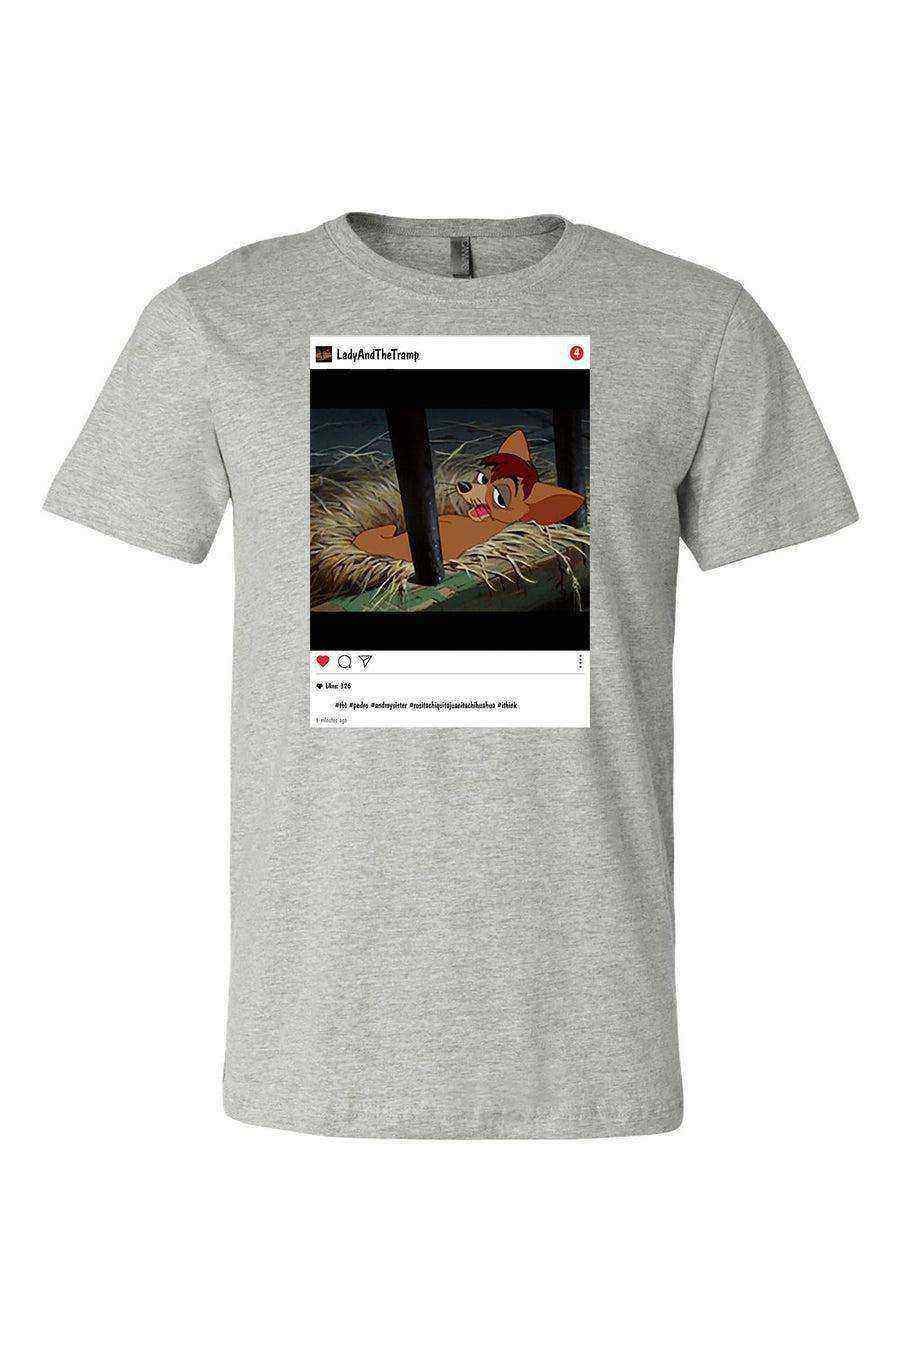 Insta Throw Back Shirt | Lady And The Tramp | Instagram - Dylan's Tees